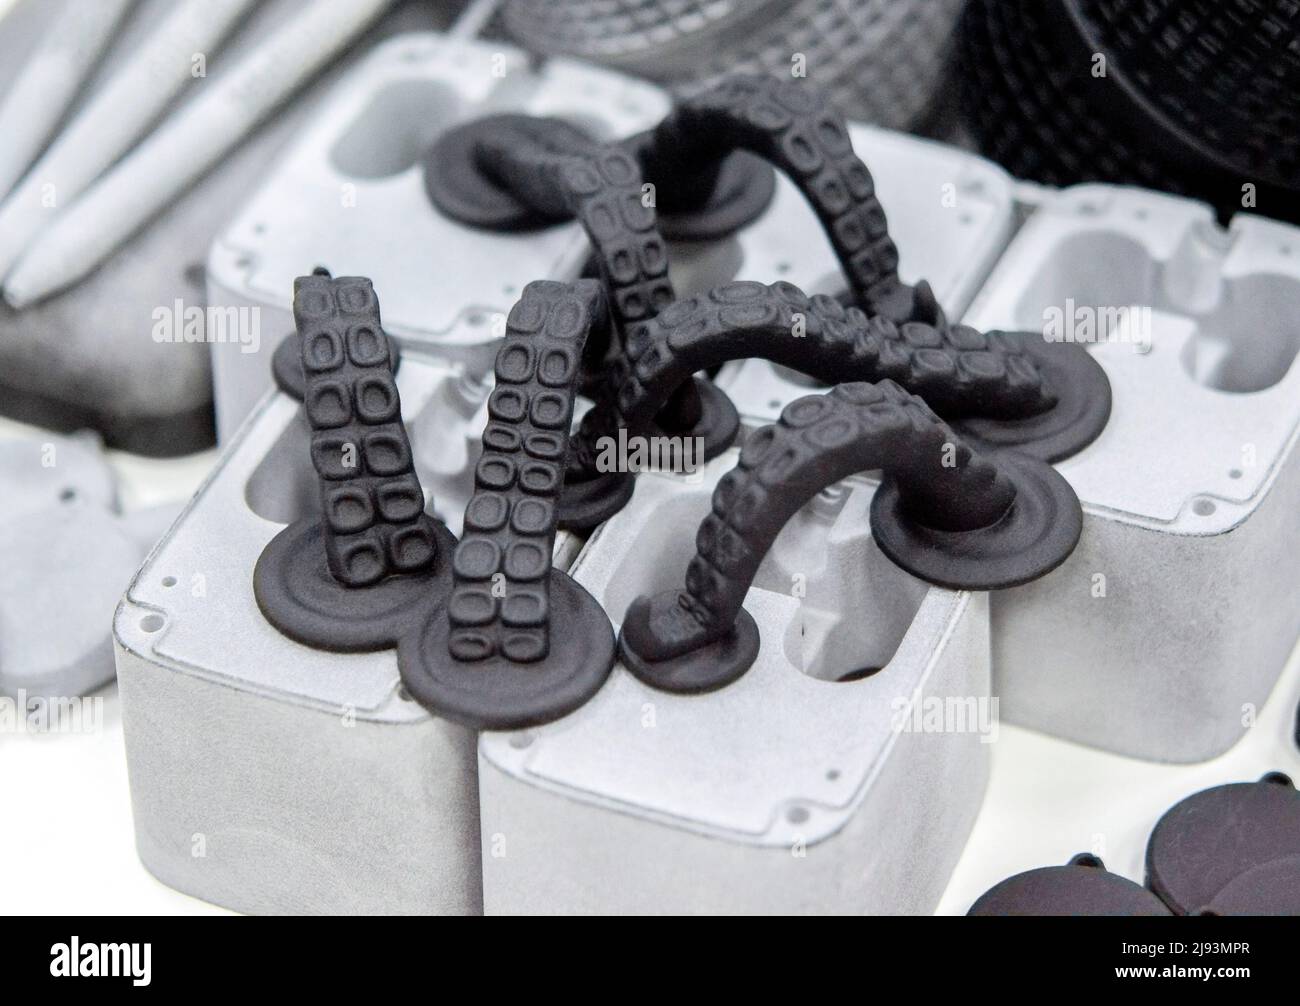 Different objects printed on 3D printer from powder polyamide. Models printed on industrial 3D printer. Modern new prototyping technology. Additive automation manufacturing 3D printing technology Stock Photo